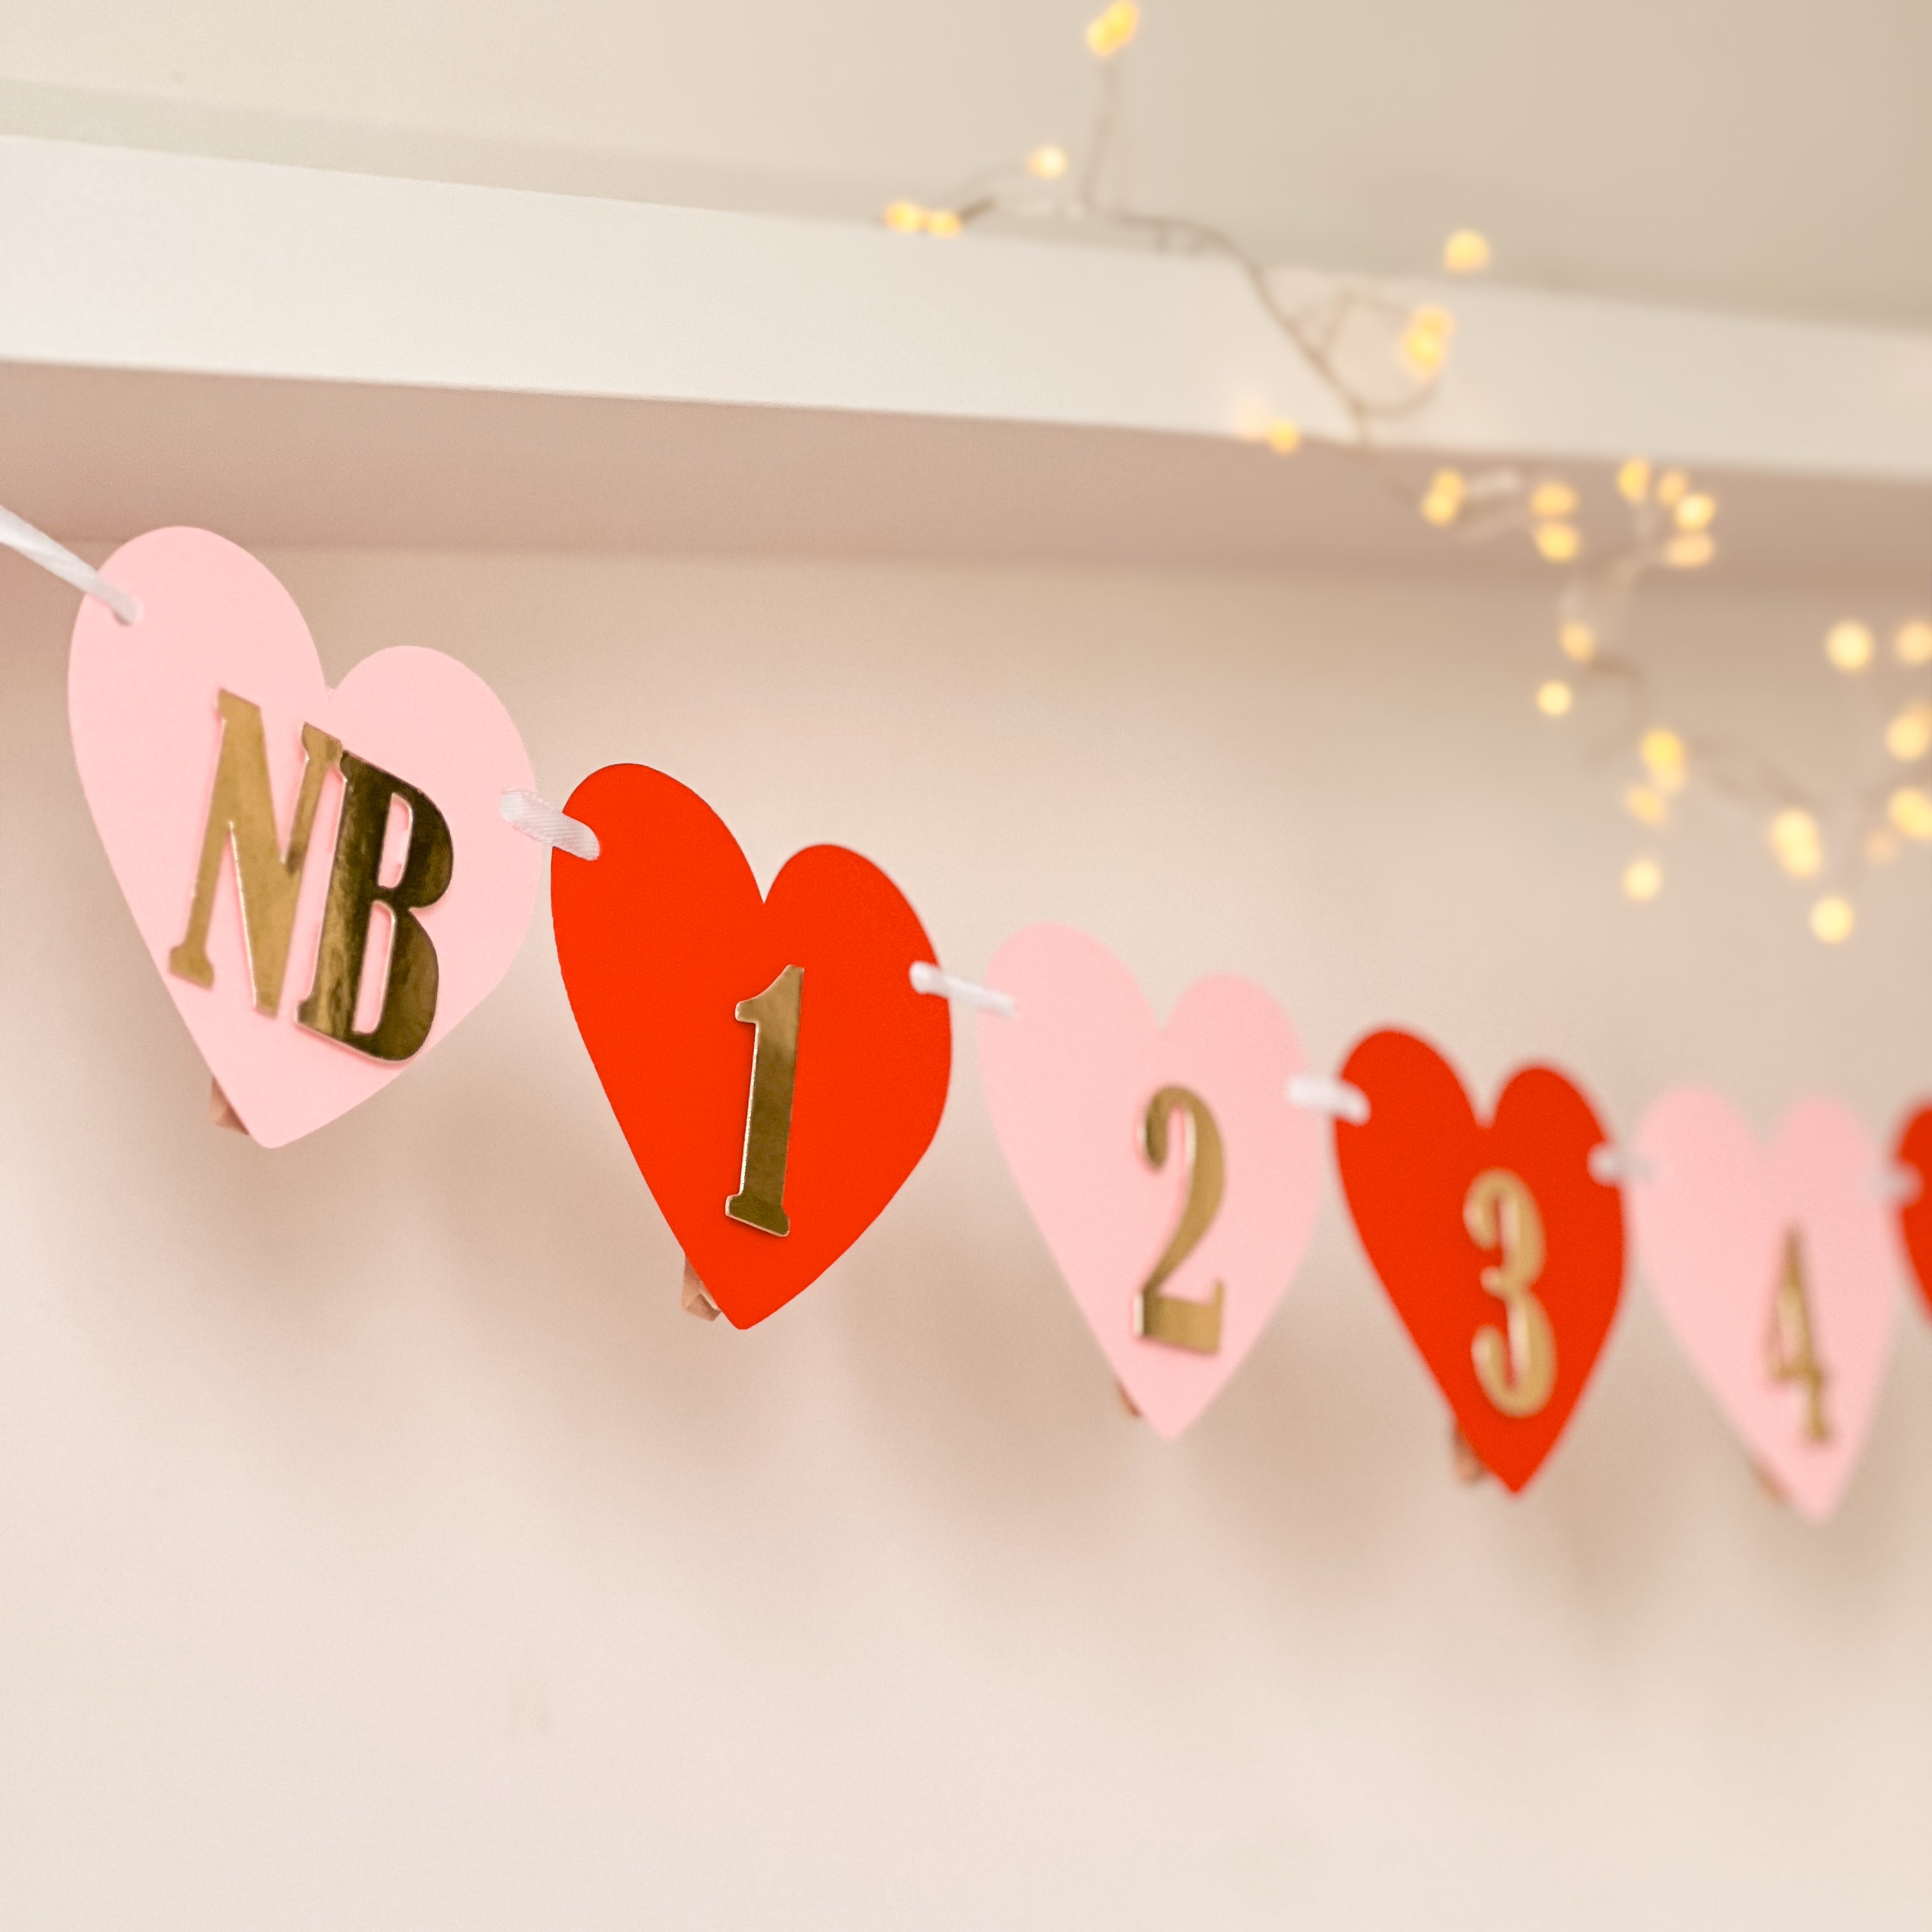 Sweetheart 12 Month Photo Banner Valentines Themed First Birthday Decorations Little Sweetheart 1st Birthday Monthly Banner